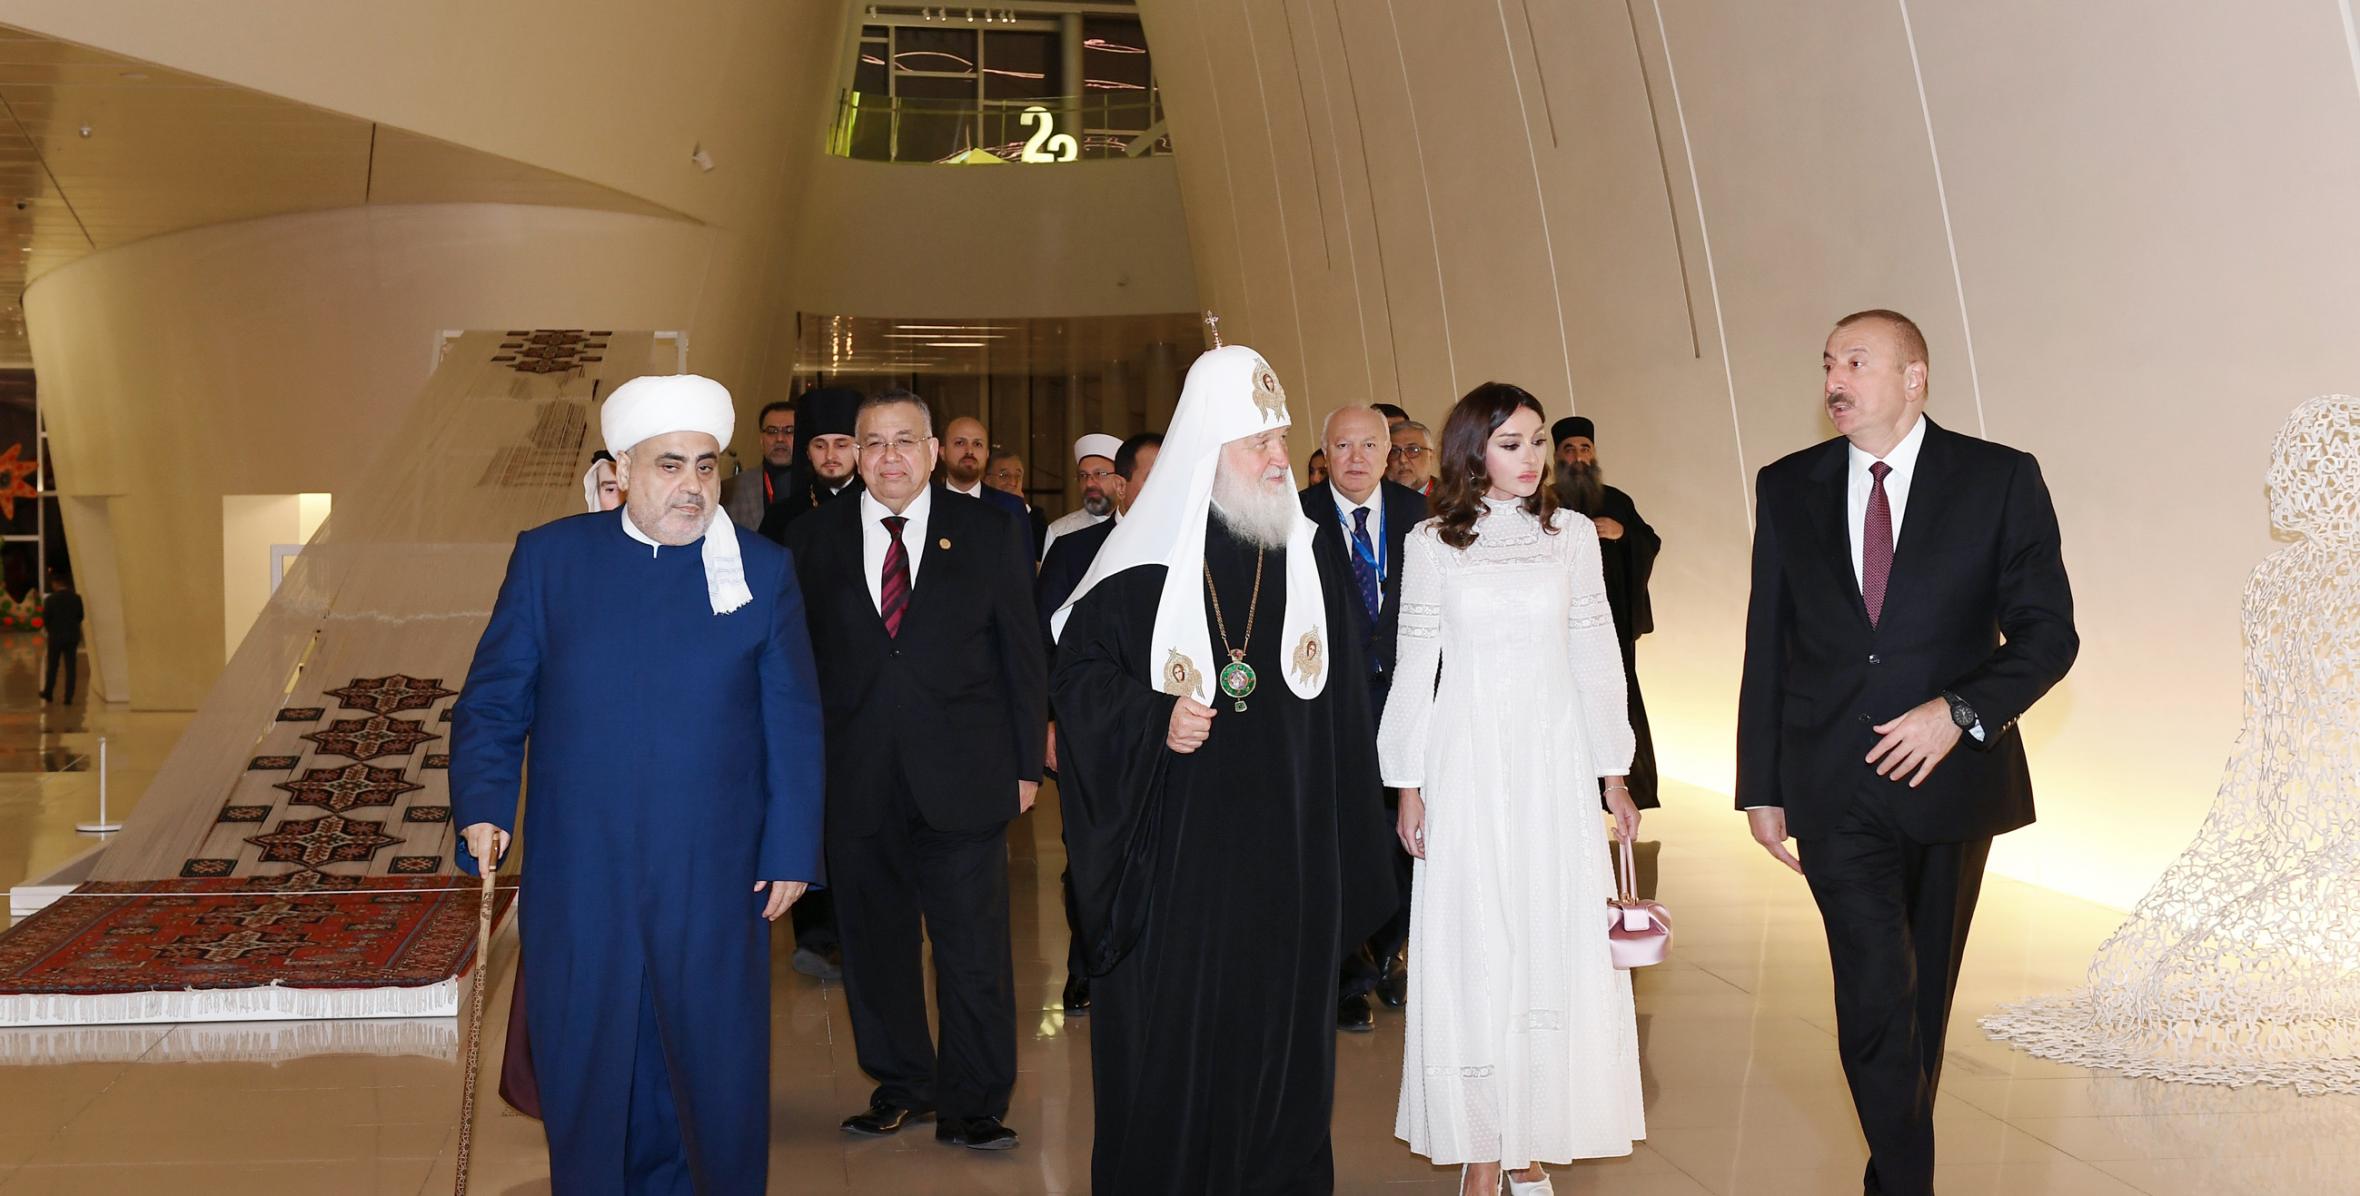 Ilham Aliyev hosted reception in honor of participants of 2nd Summit of World Religious Leaders